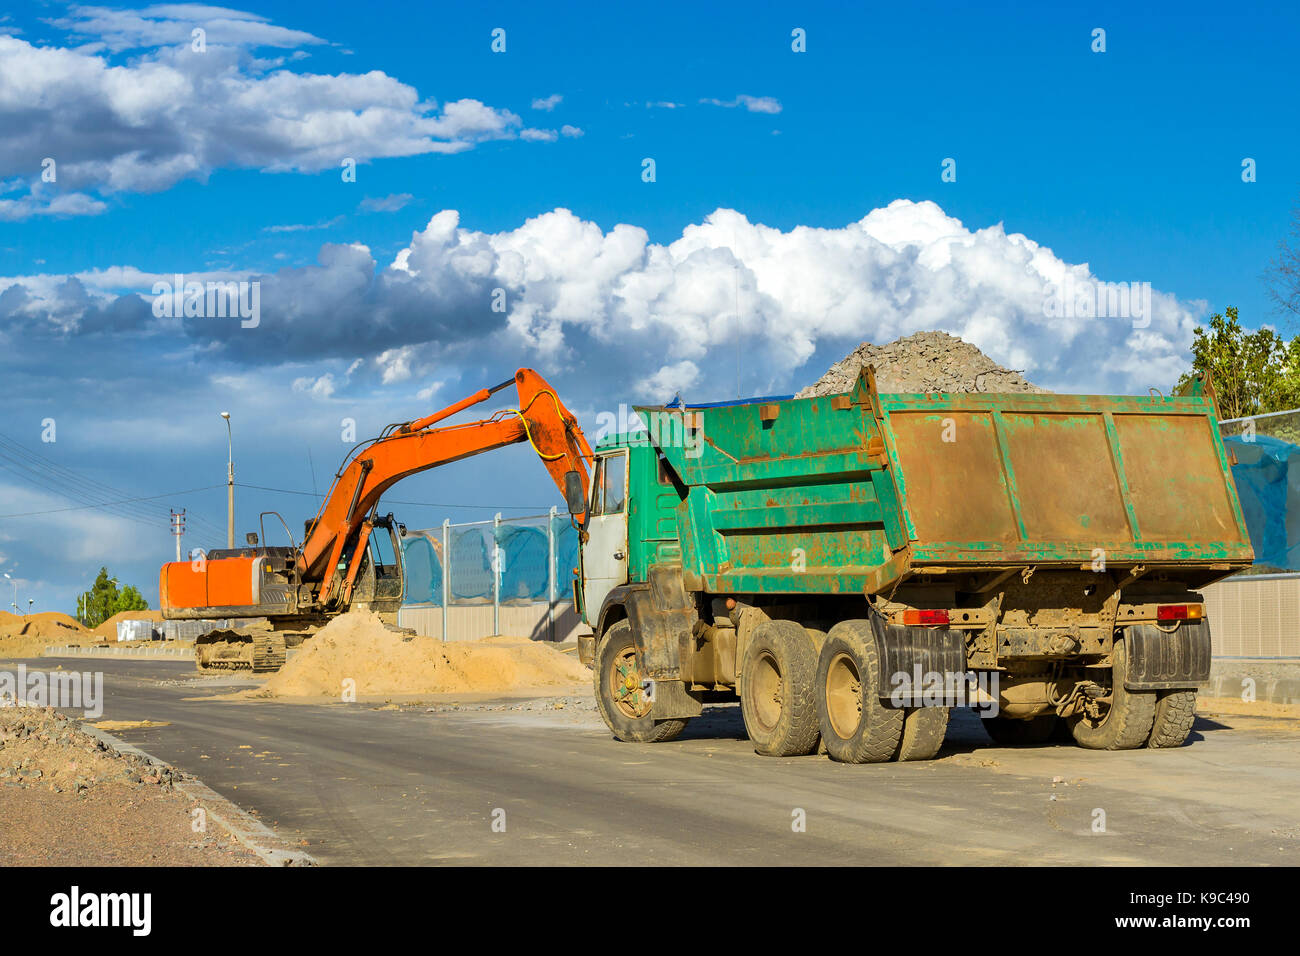 Crawler Excavator digging bucket on construction of high-speed bypass road. Working truck with body. Heavy machine equipment for excavation works at c Stock Photo